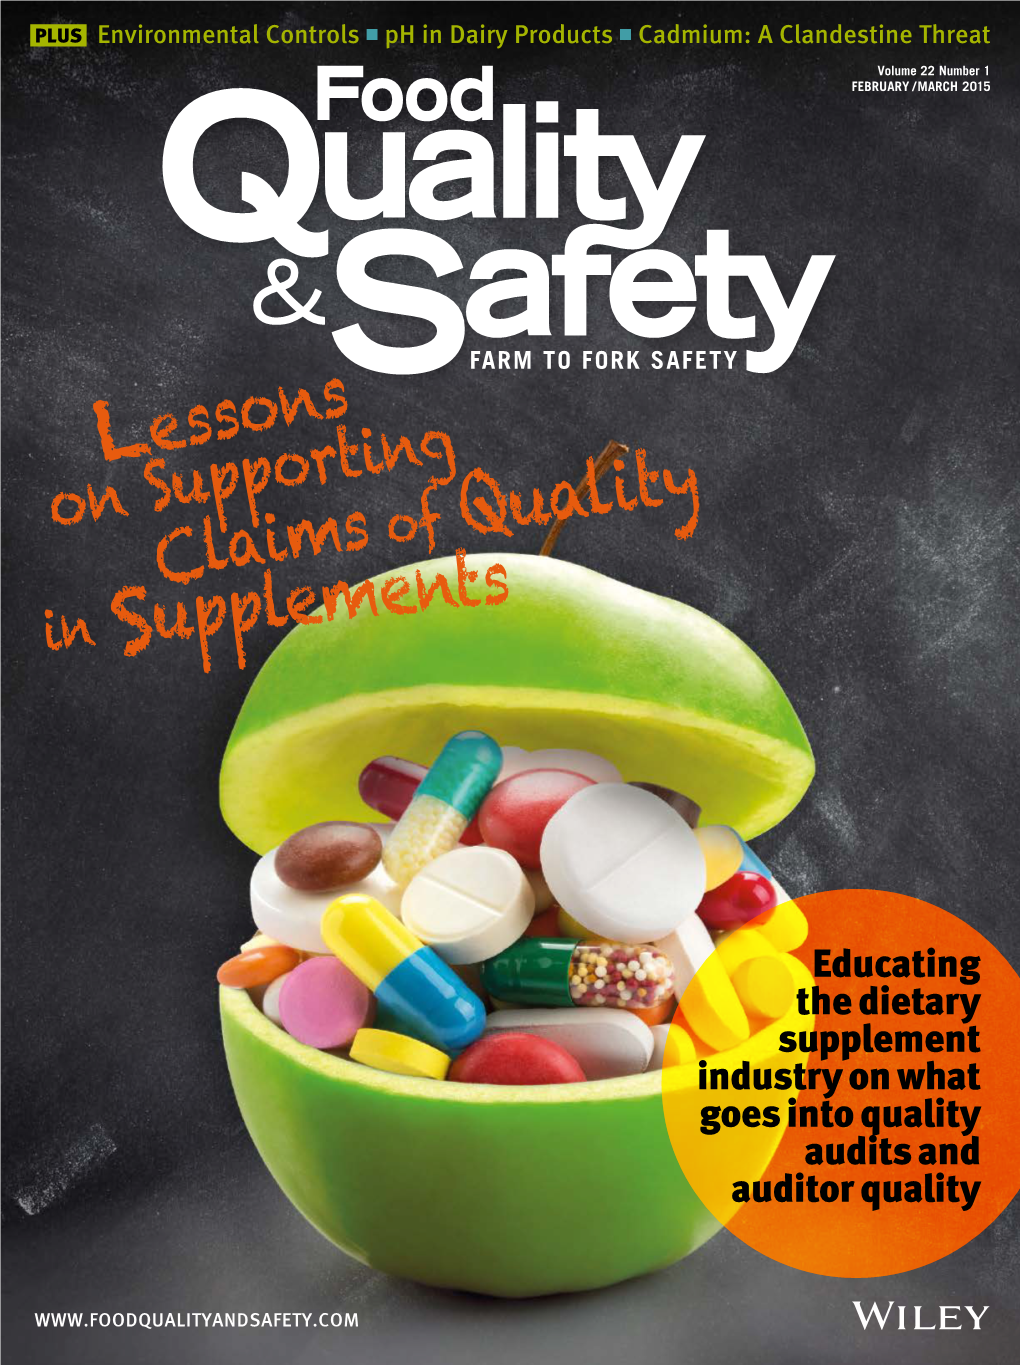 Educating the Dietary Supplement Industry on What Goes Into Quality Audits and Auditor Quality